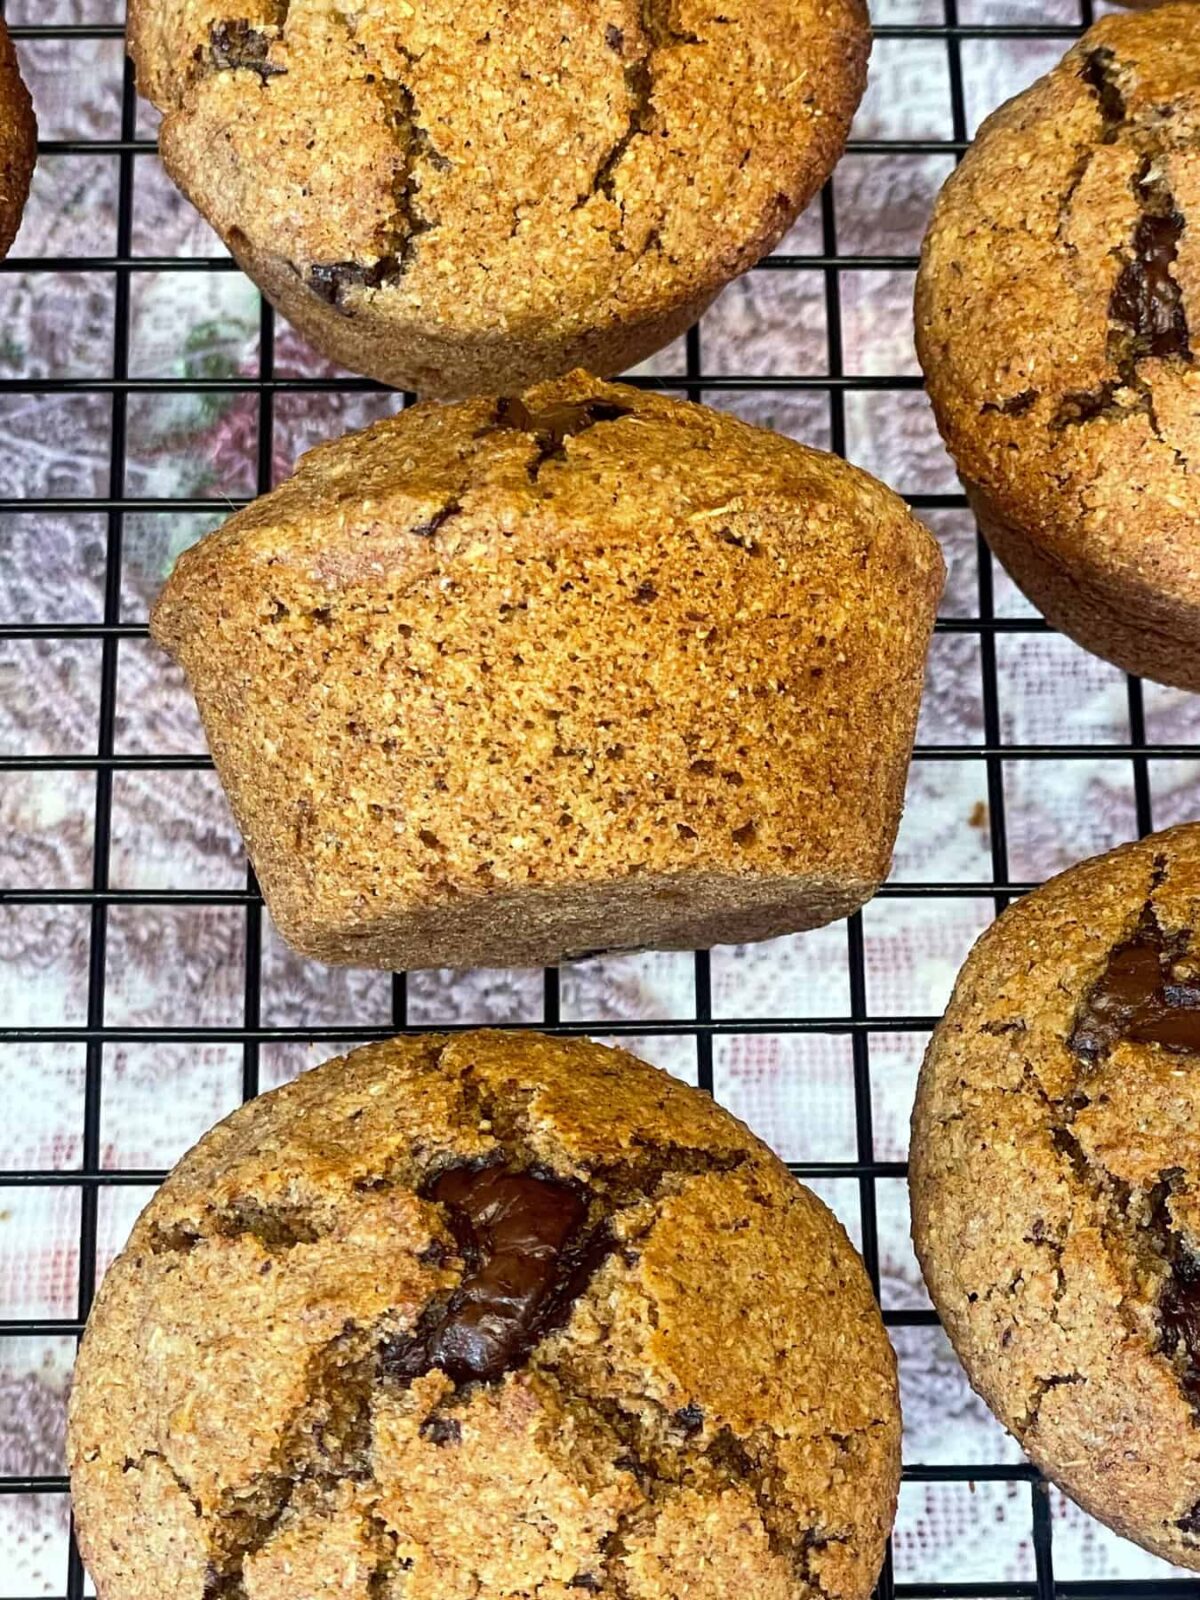 Chocolate bran muffins on wire rack with one on its side.